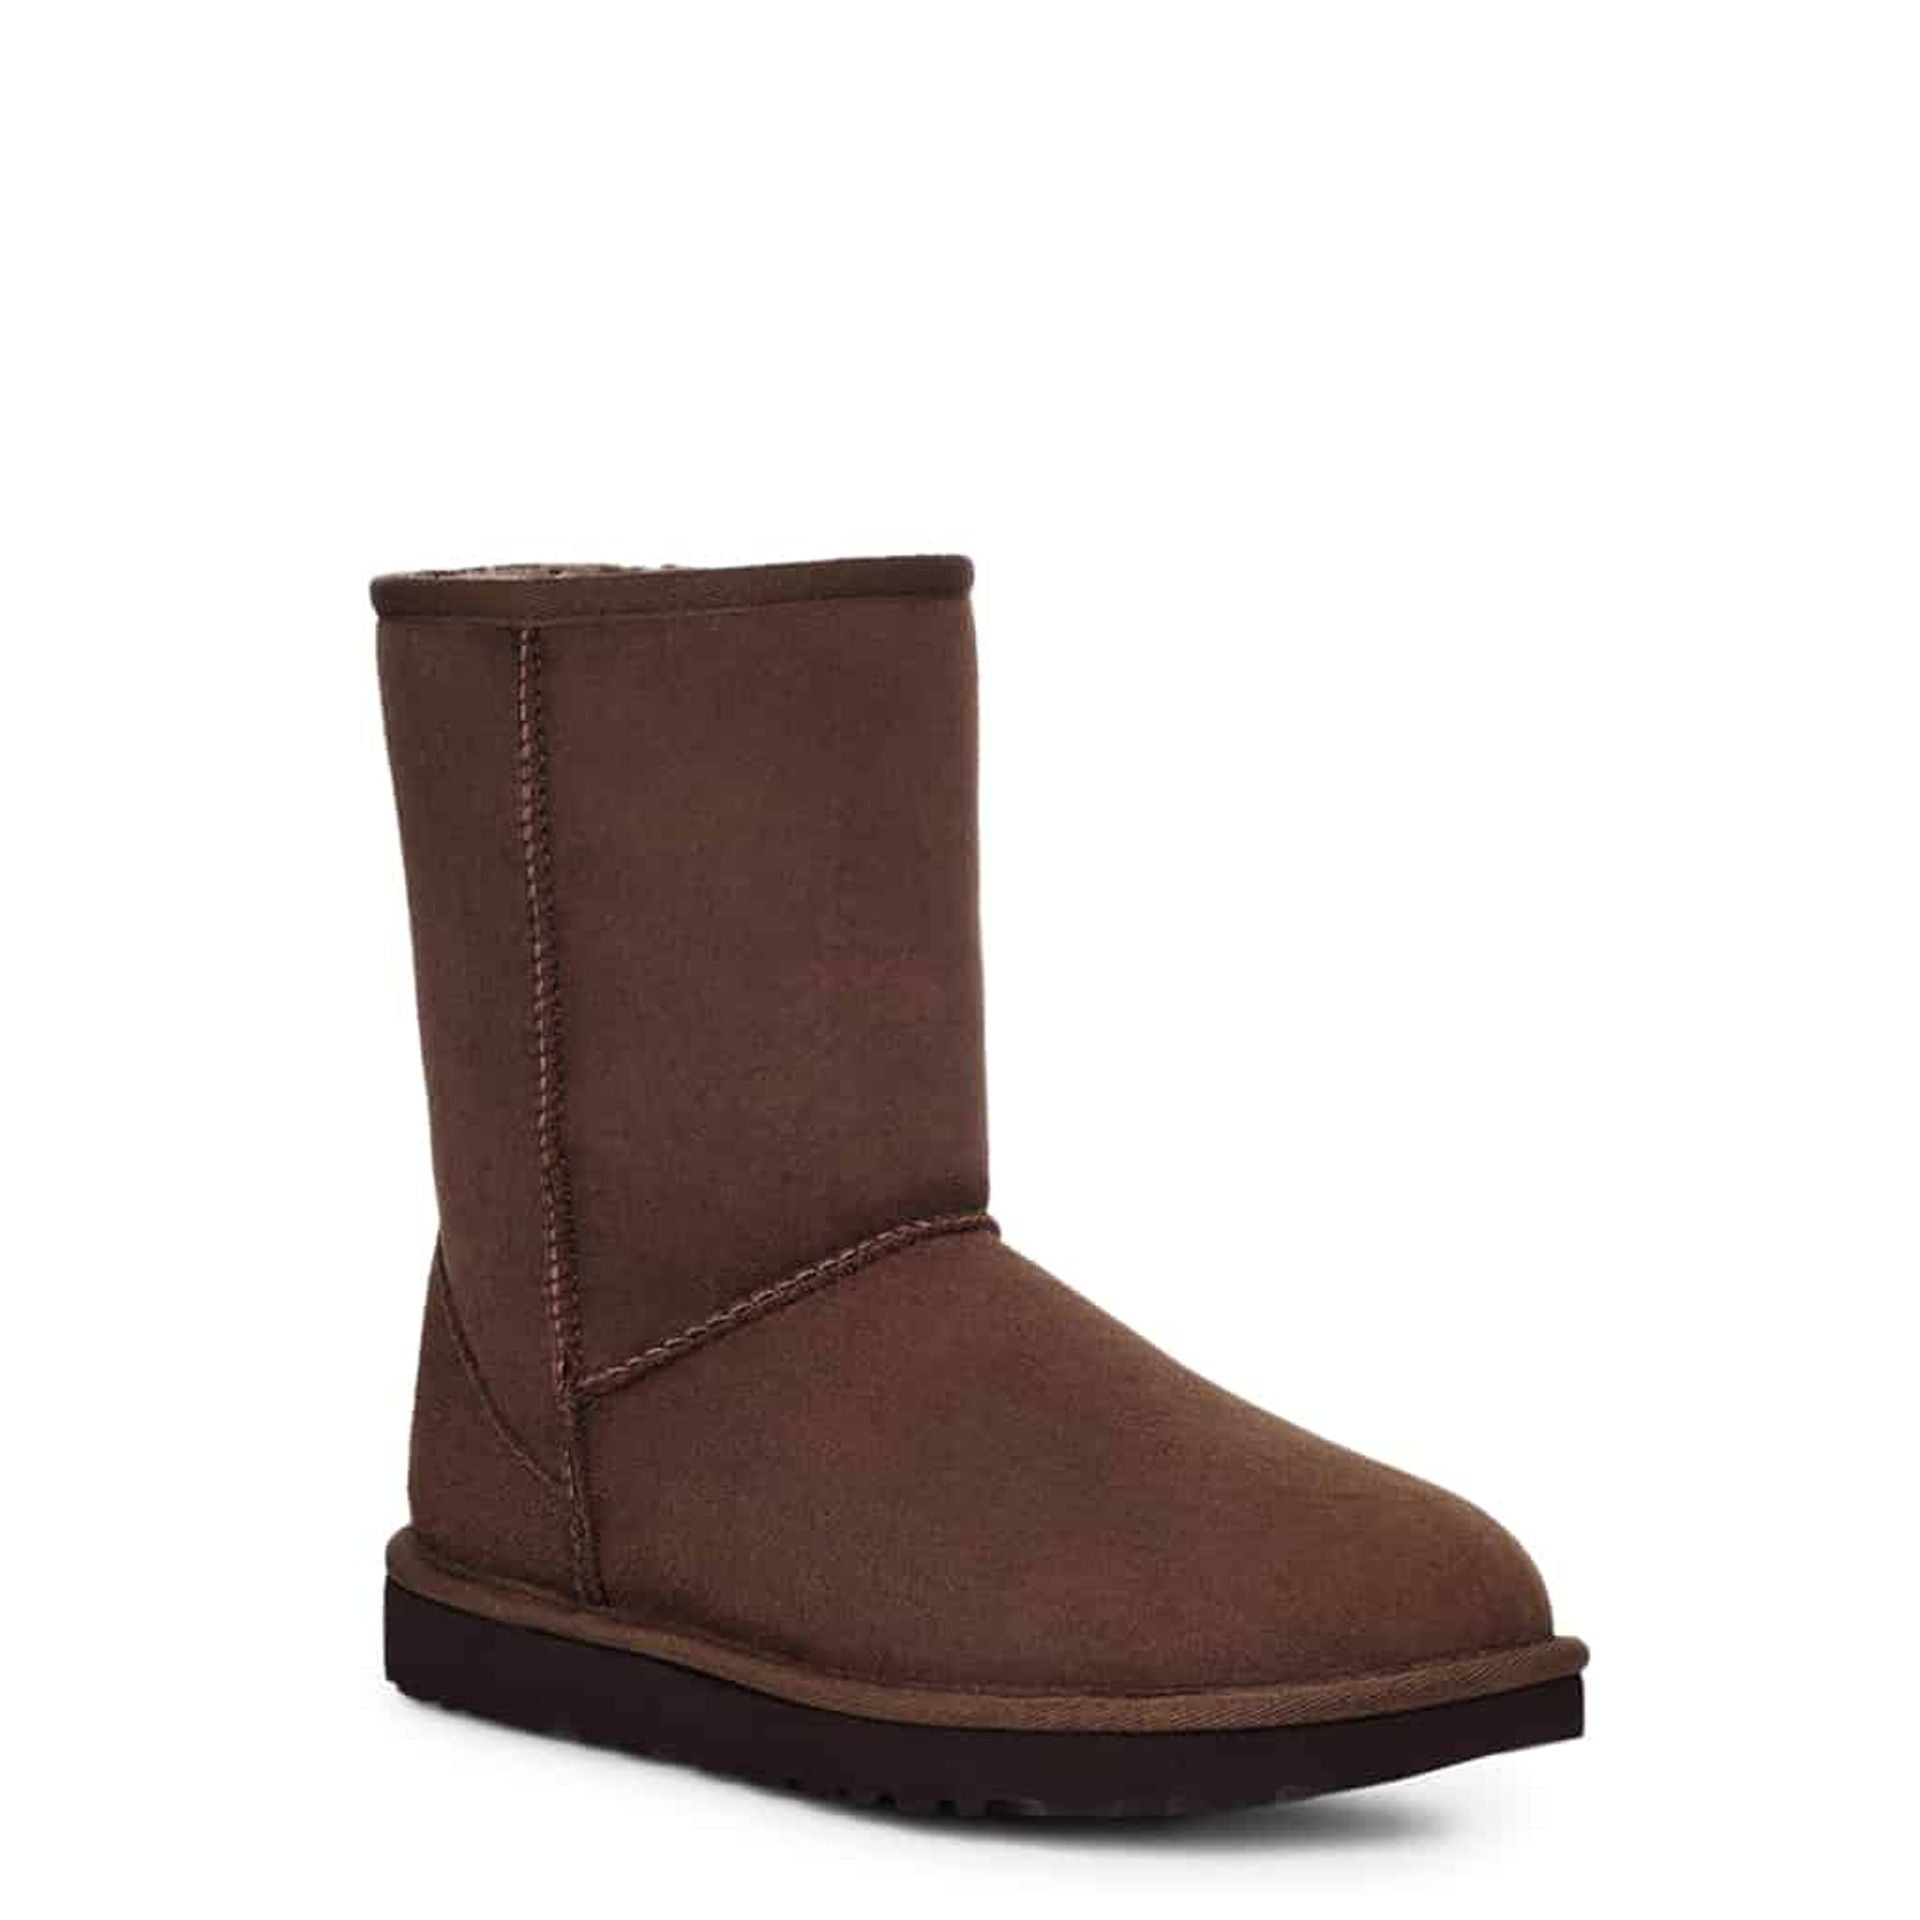 UGG Ankle boots